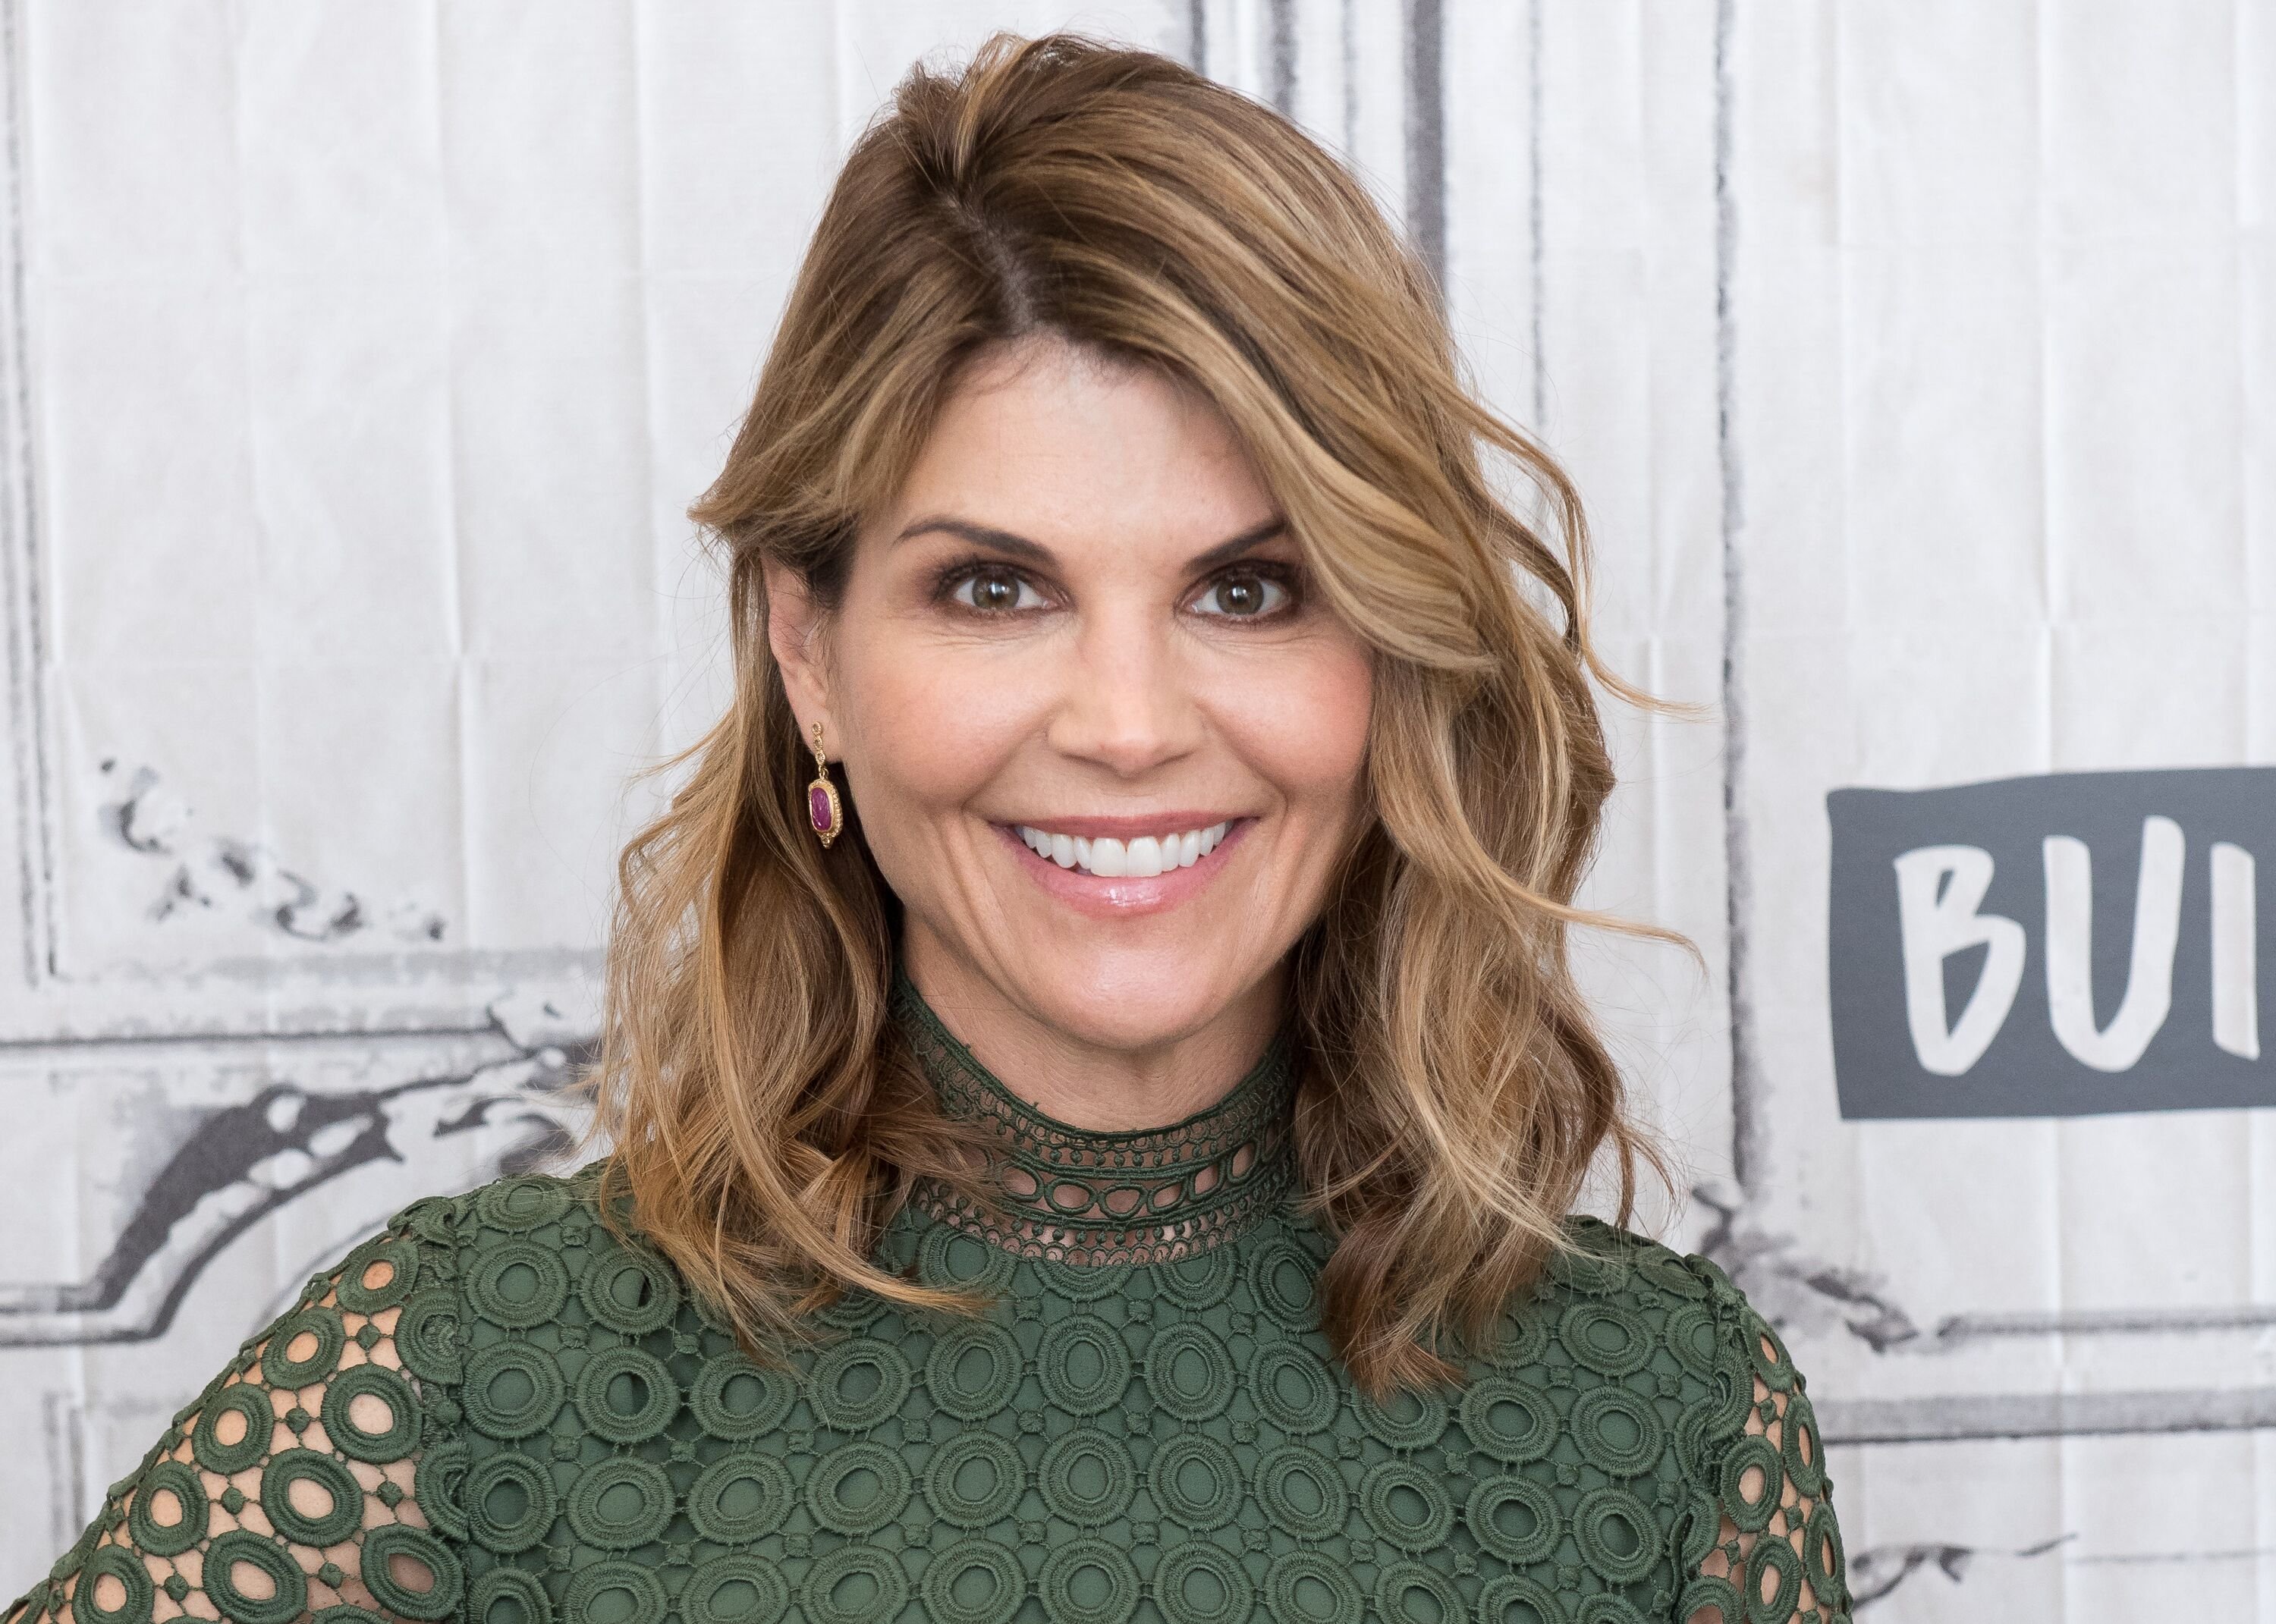 Lori Loughlin at Build Studio on February 15, 2018, in New York City | Photo: Mike Pont/Getty Images